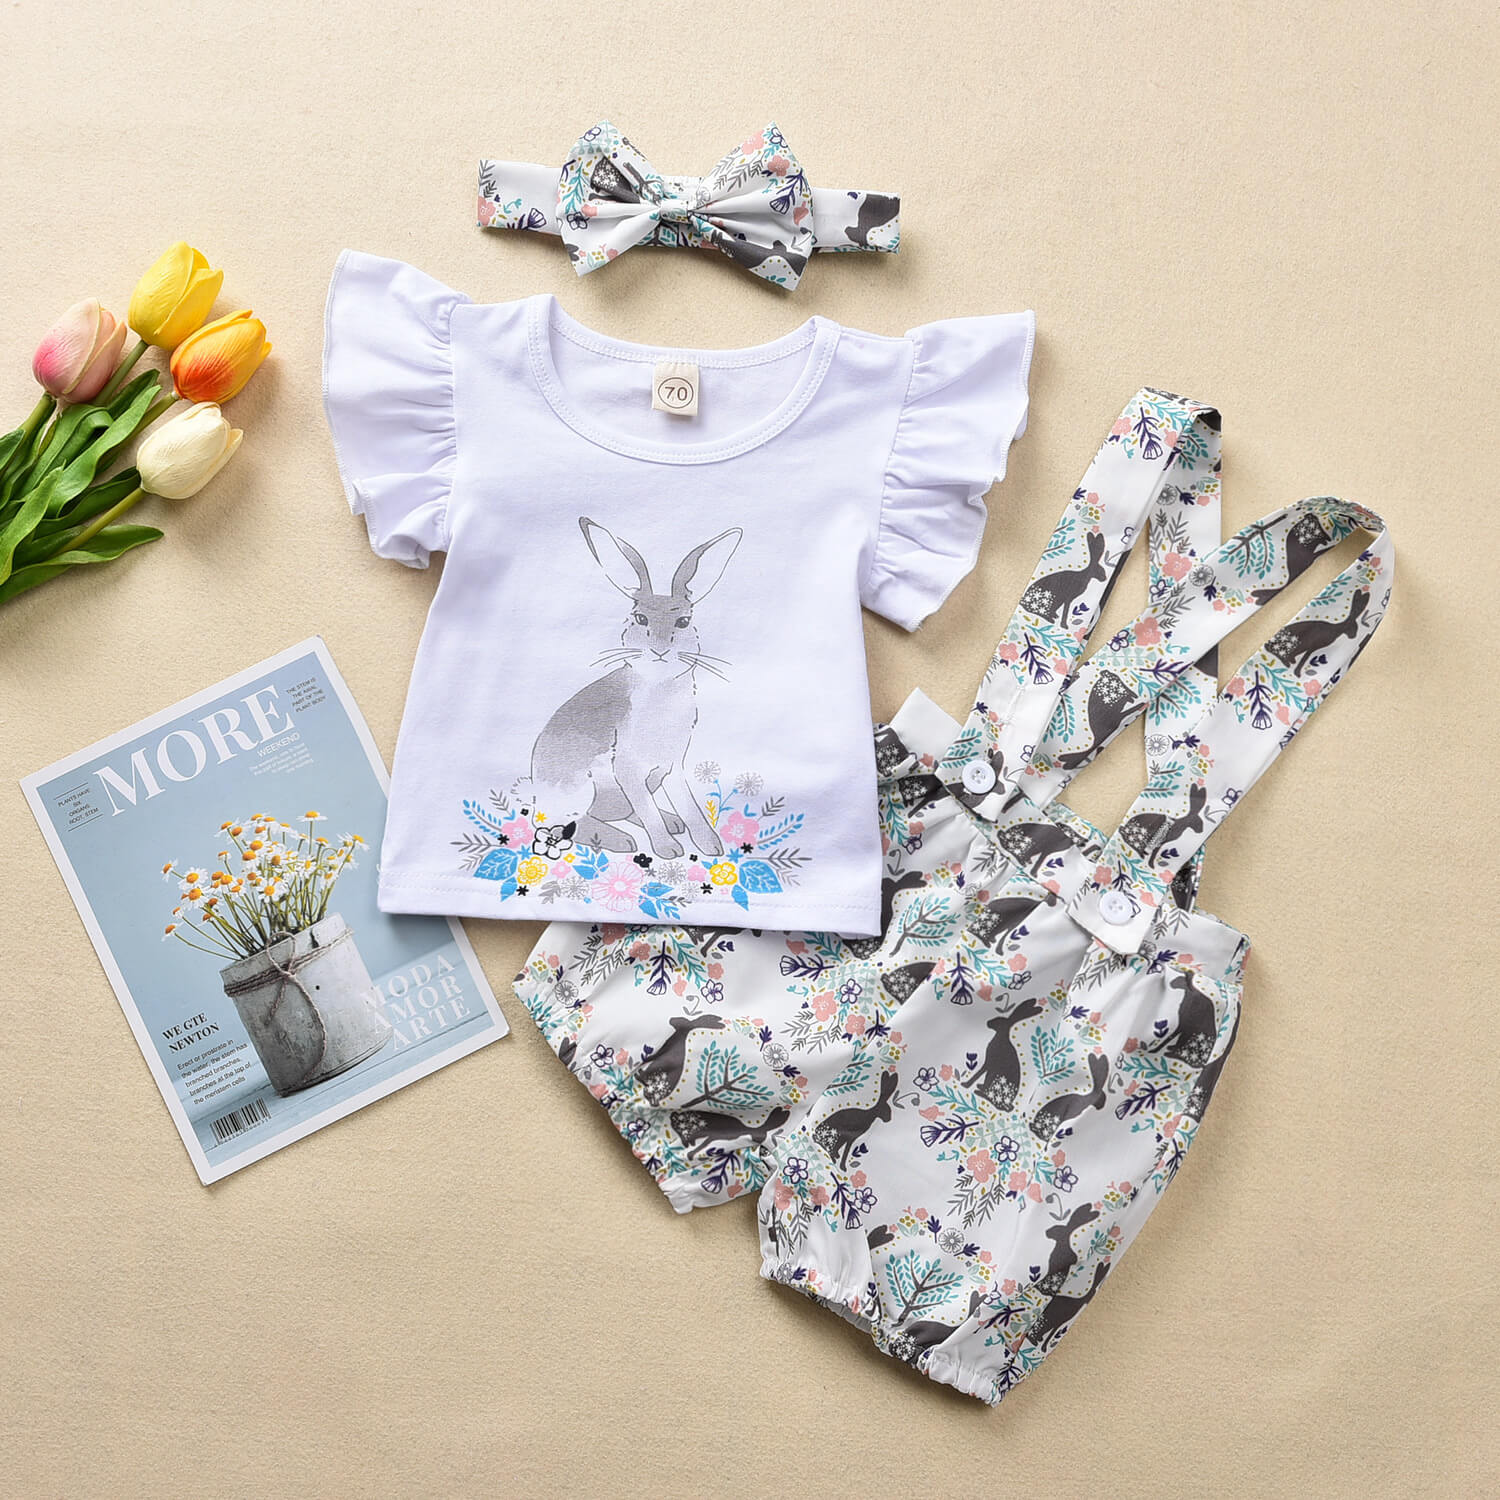 Baby Girls Easter Outfit Toddler Bunny Shirt Suspender Headband 3pcs Suit for Easter Party